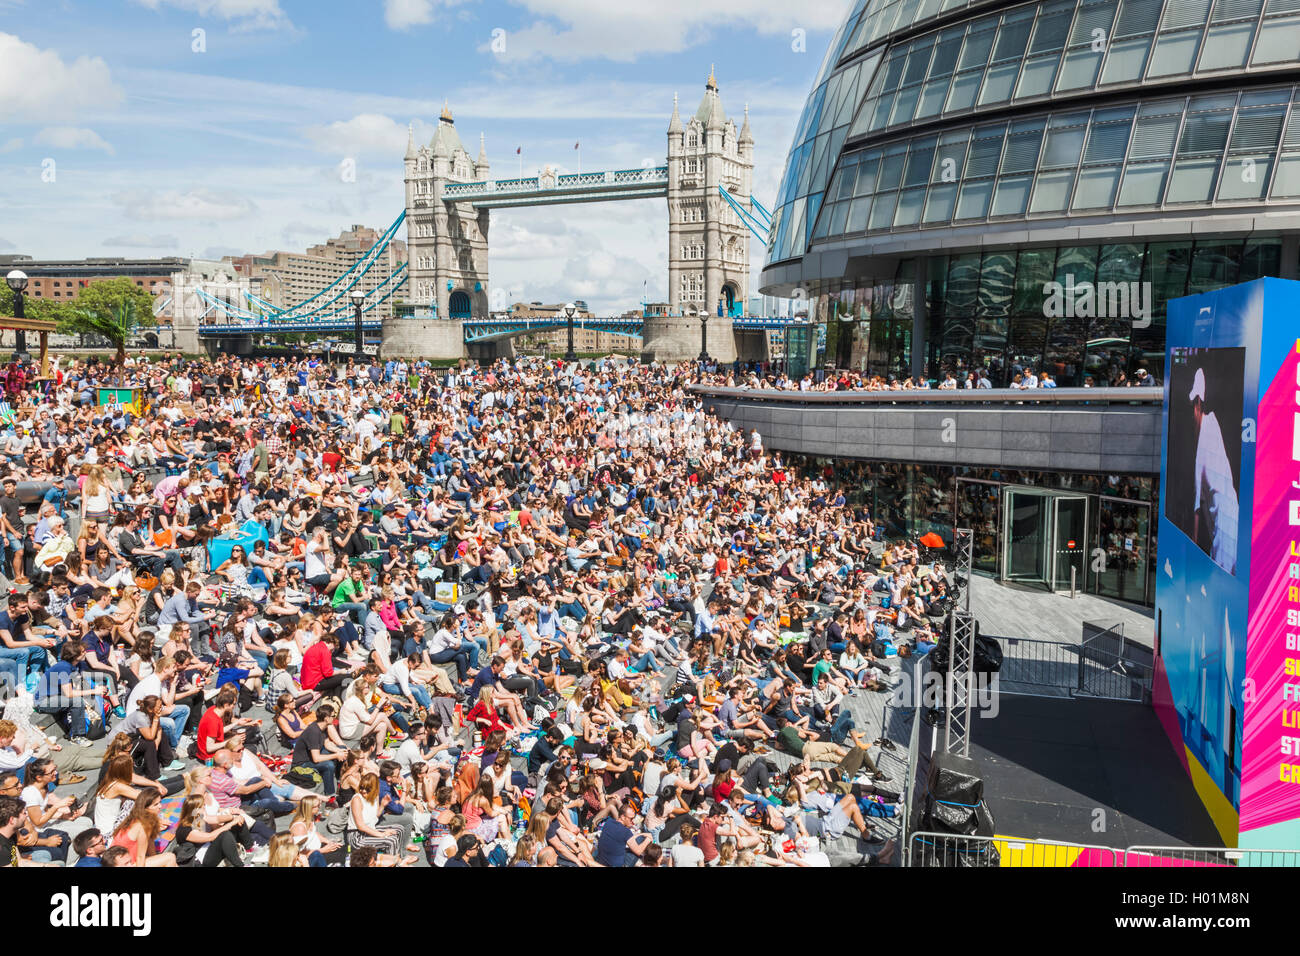 England, London, Southwark, Crowds at The Scoop Open Air Theatre and The Tower of London Stock Photo